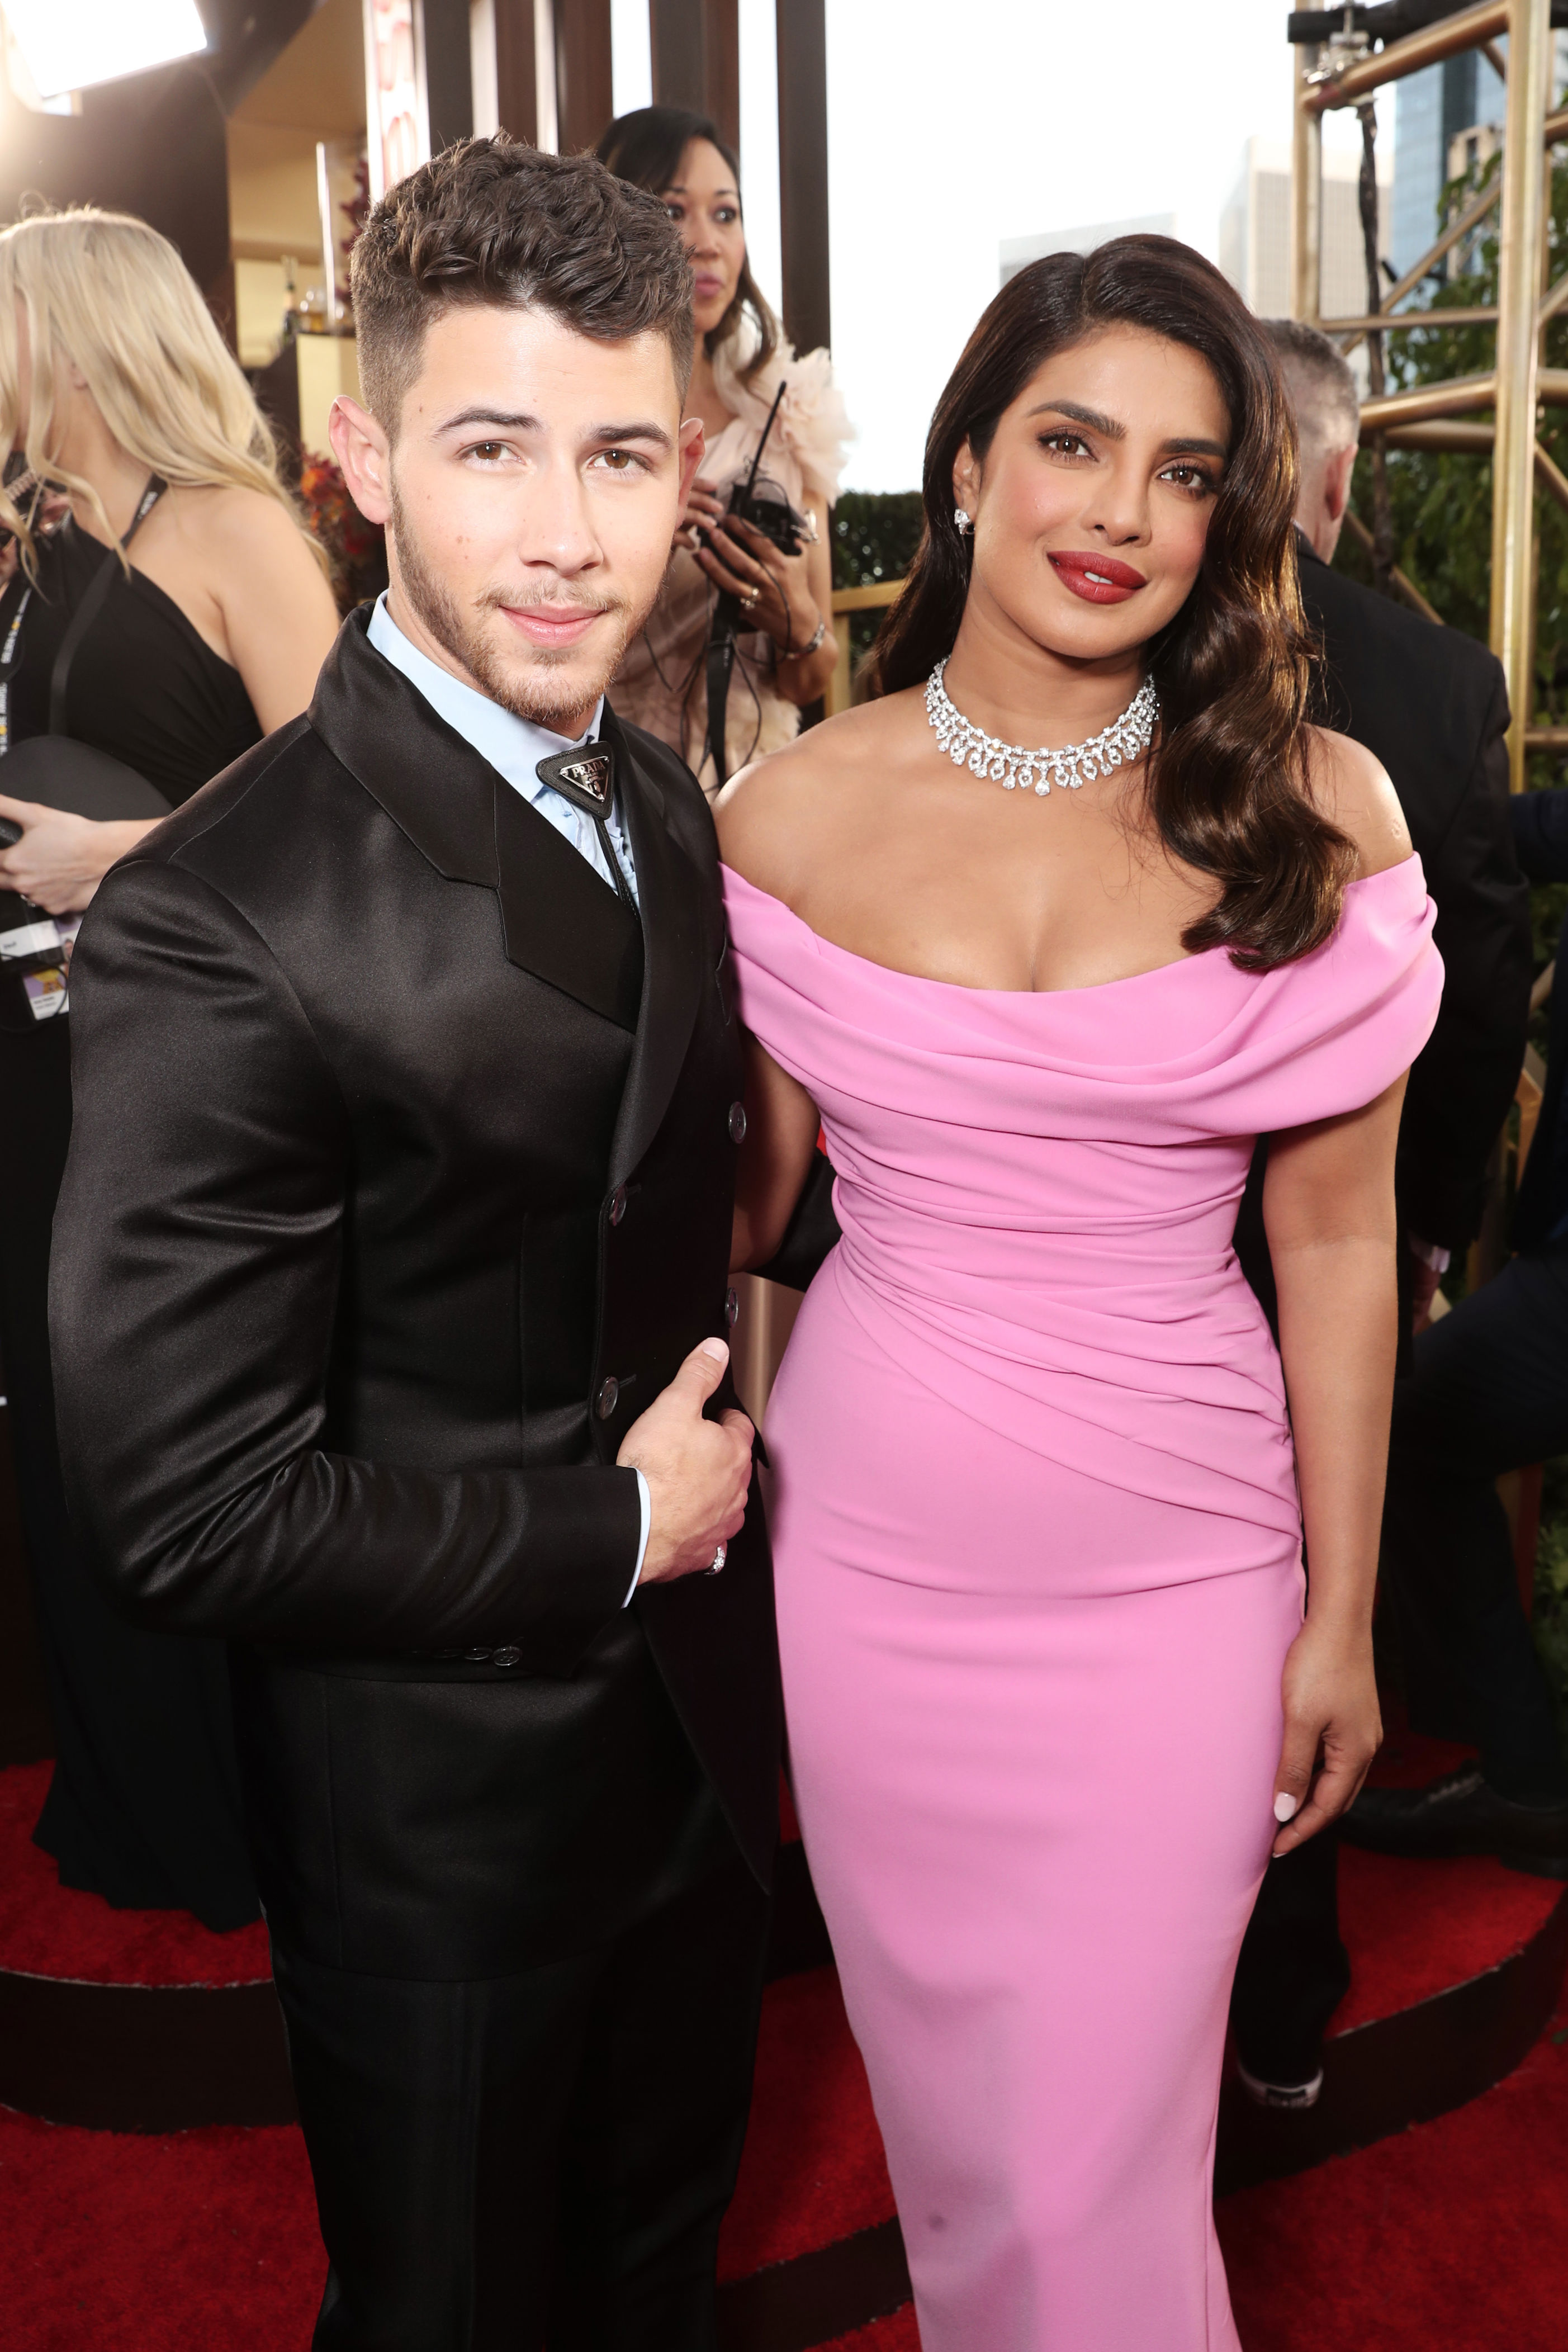 <p><a href="https://www.wonderwall.com/celebrity/profiles/overview/nick-jonas-1229.article">Nick Jonas</a> and Priyanka Chopra started off as friends, but things turned romantic in the summer of 2018 and they got serious in a hurry. Priyanka, who's 10 years older than Nick, even introduced him to her mom within weeks! Within the first few weeks of dating, they couple was seen in India, Brazil, New York City and Los Angeles -- and they were engaged by the end of July. They married in India that December when the actress was 36 and the singer was 26. In 2022, they welcomed their first child via surrogate. </p>